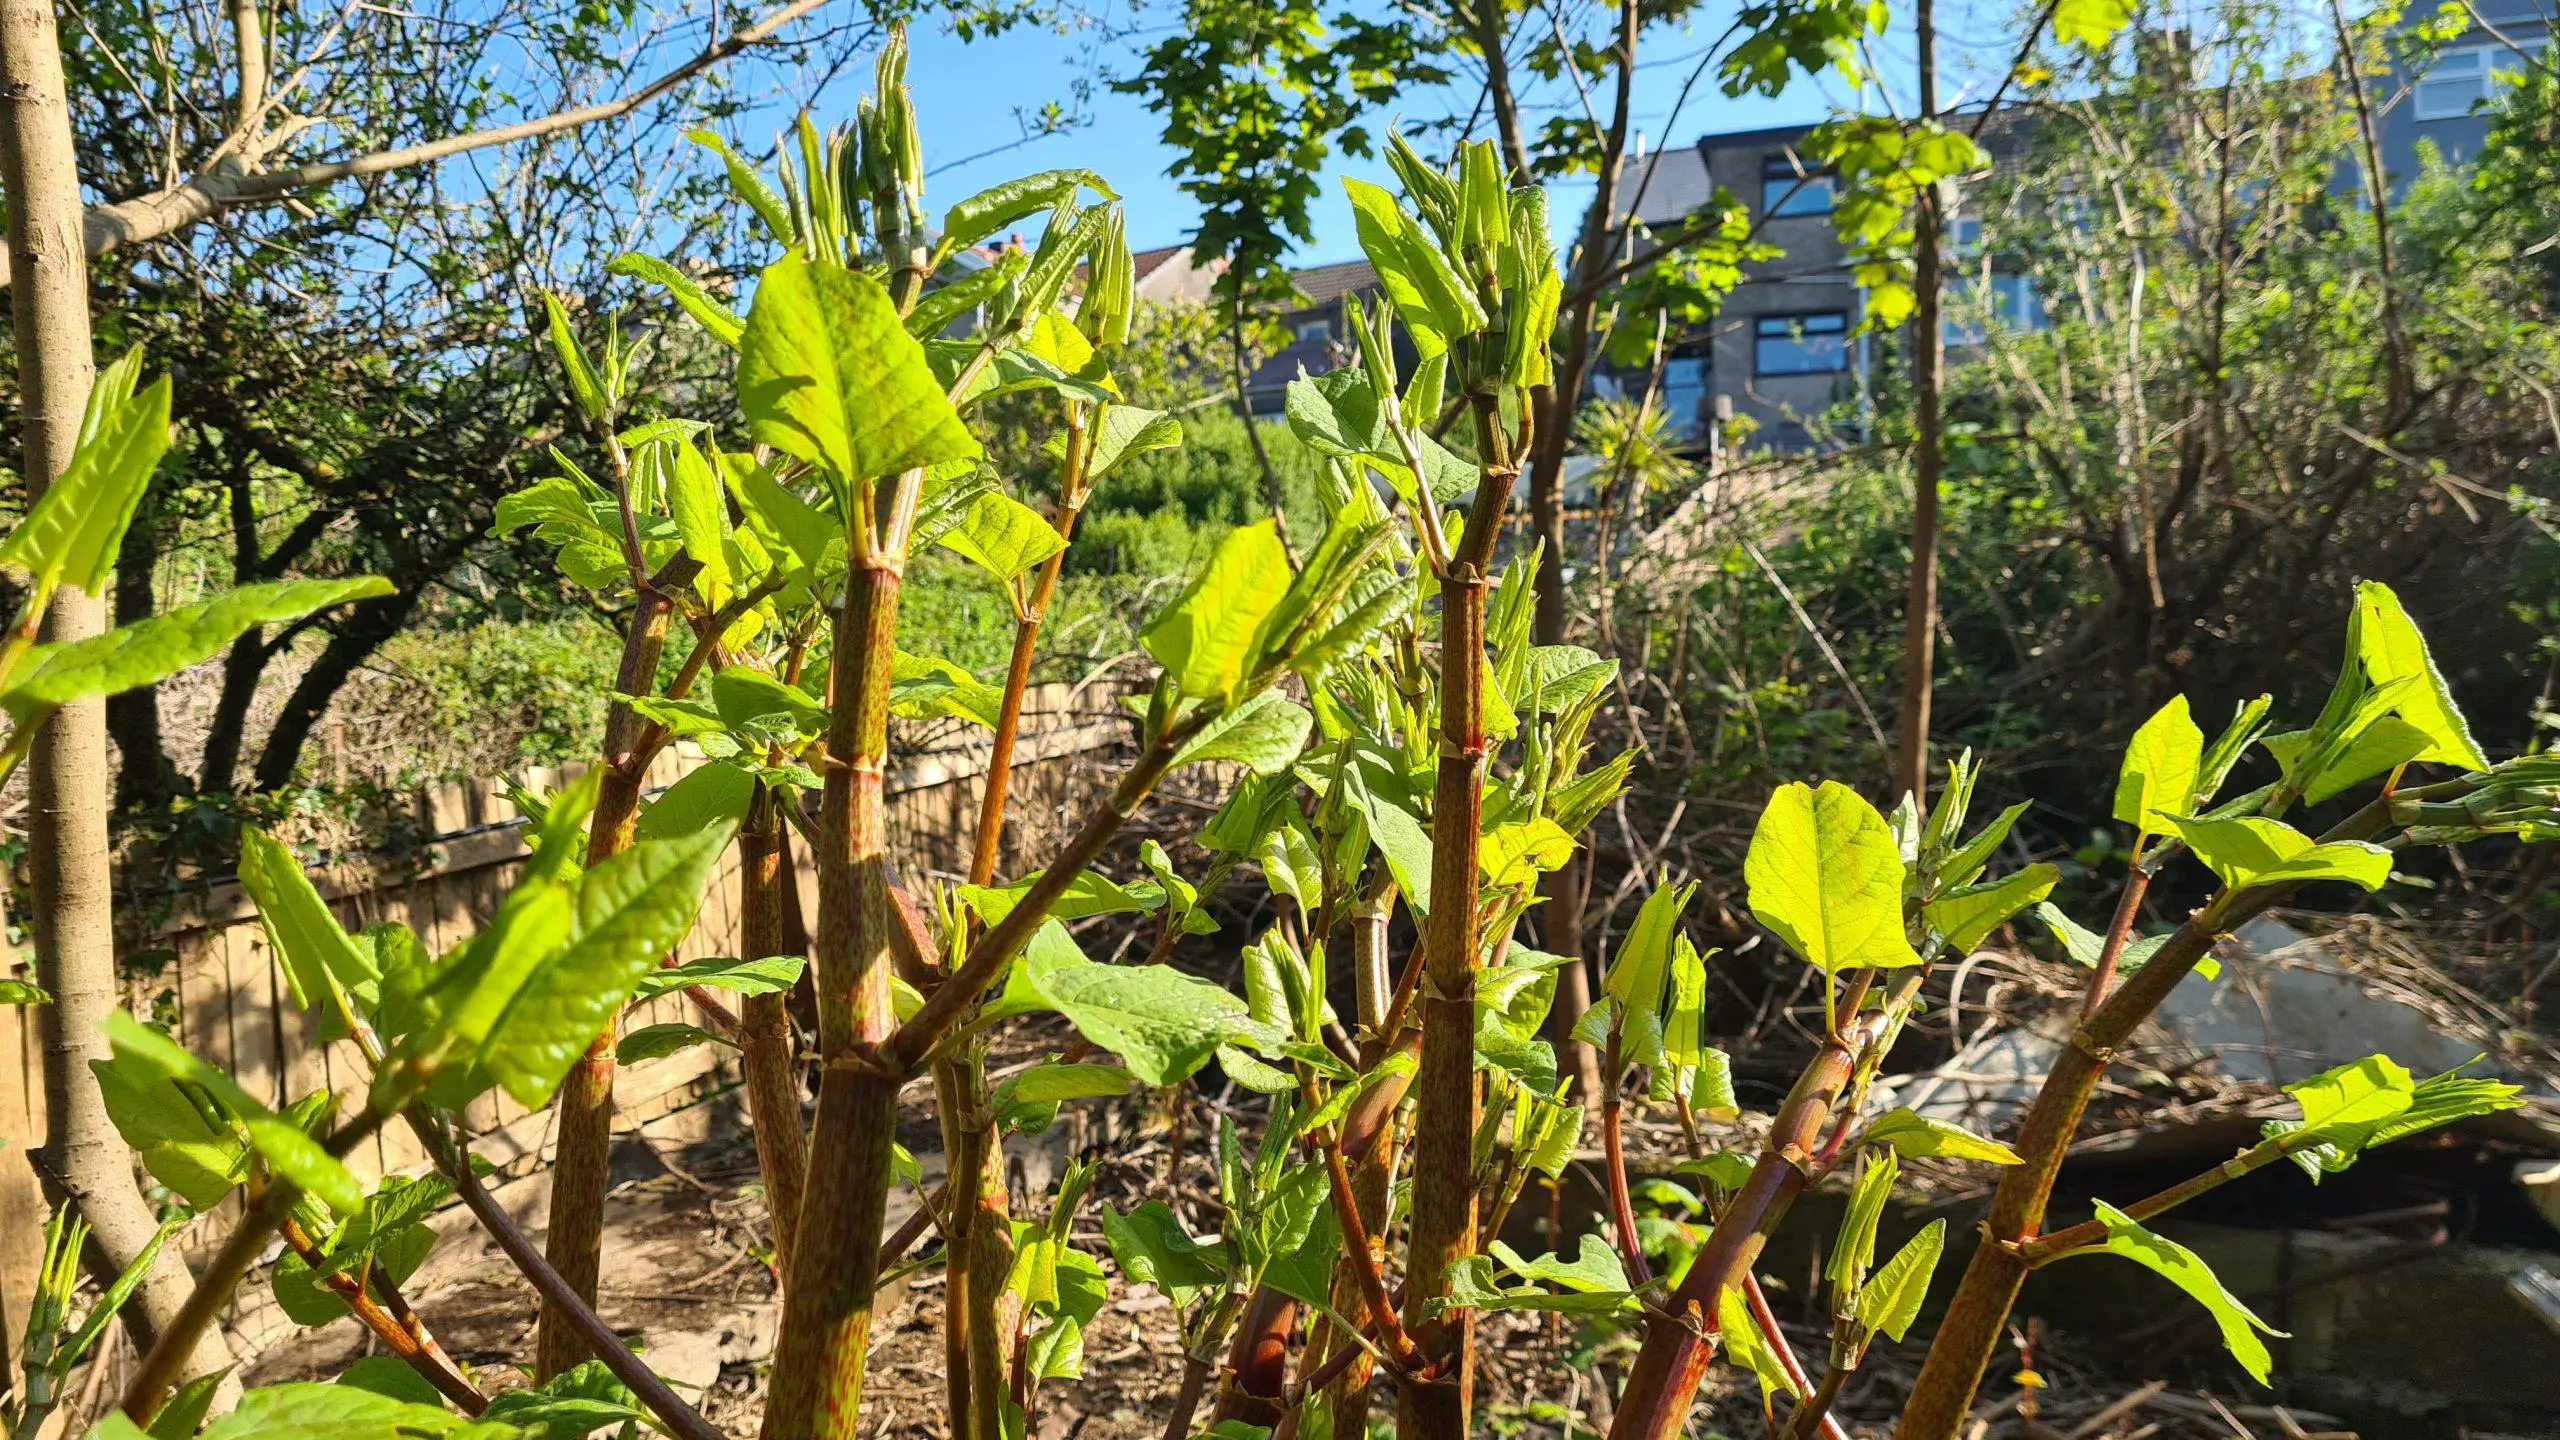 New shoots of Japanese knotweed emerging within a garden and all too close to the property